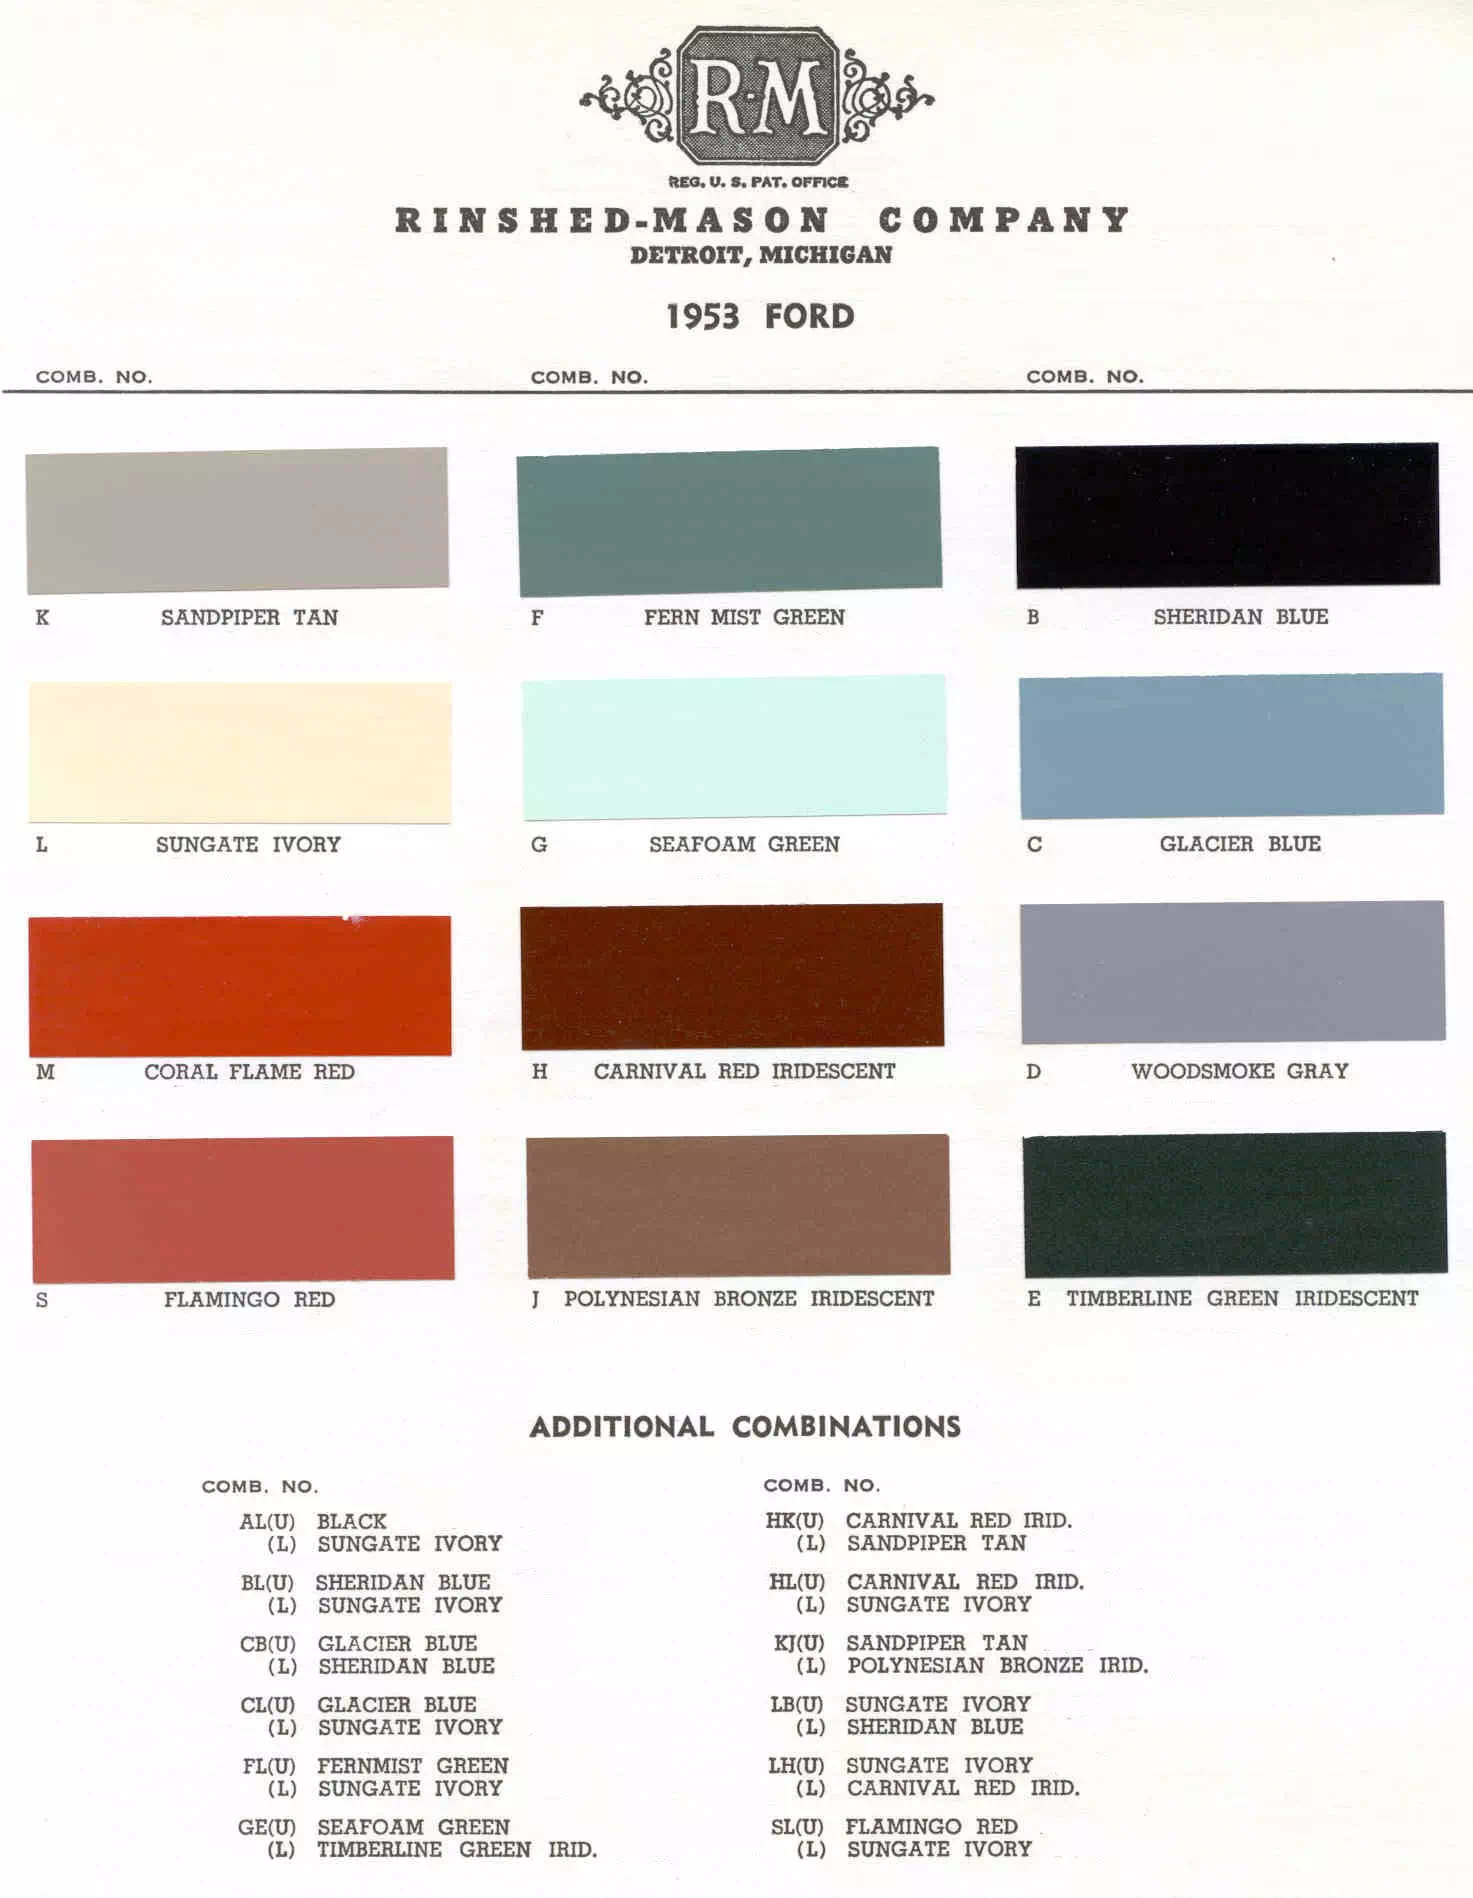 exterior colors, thier codes, and example swatches used on the exterior of the vehicles in 1953